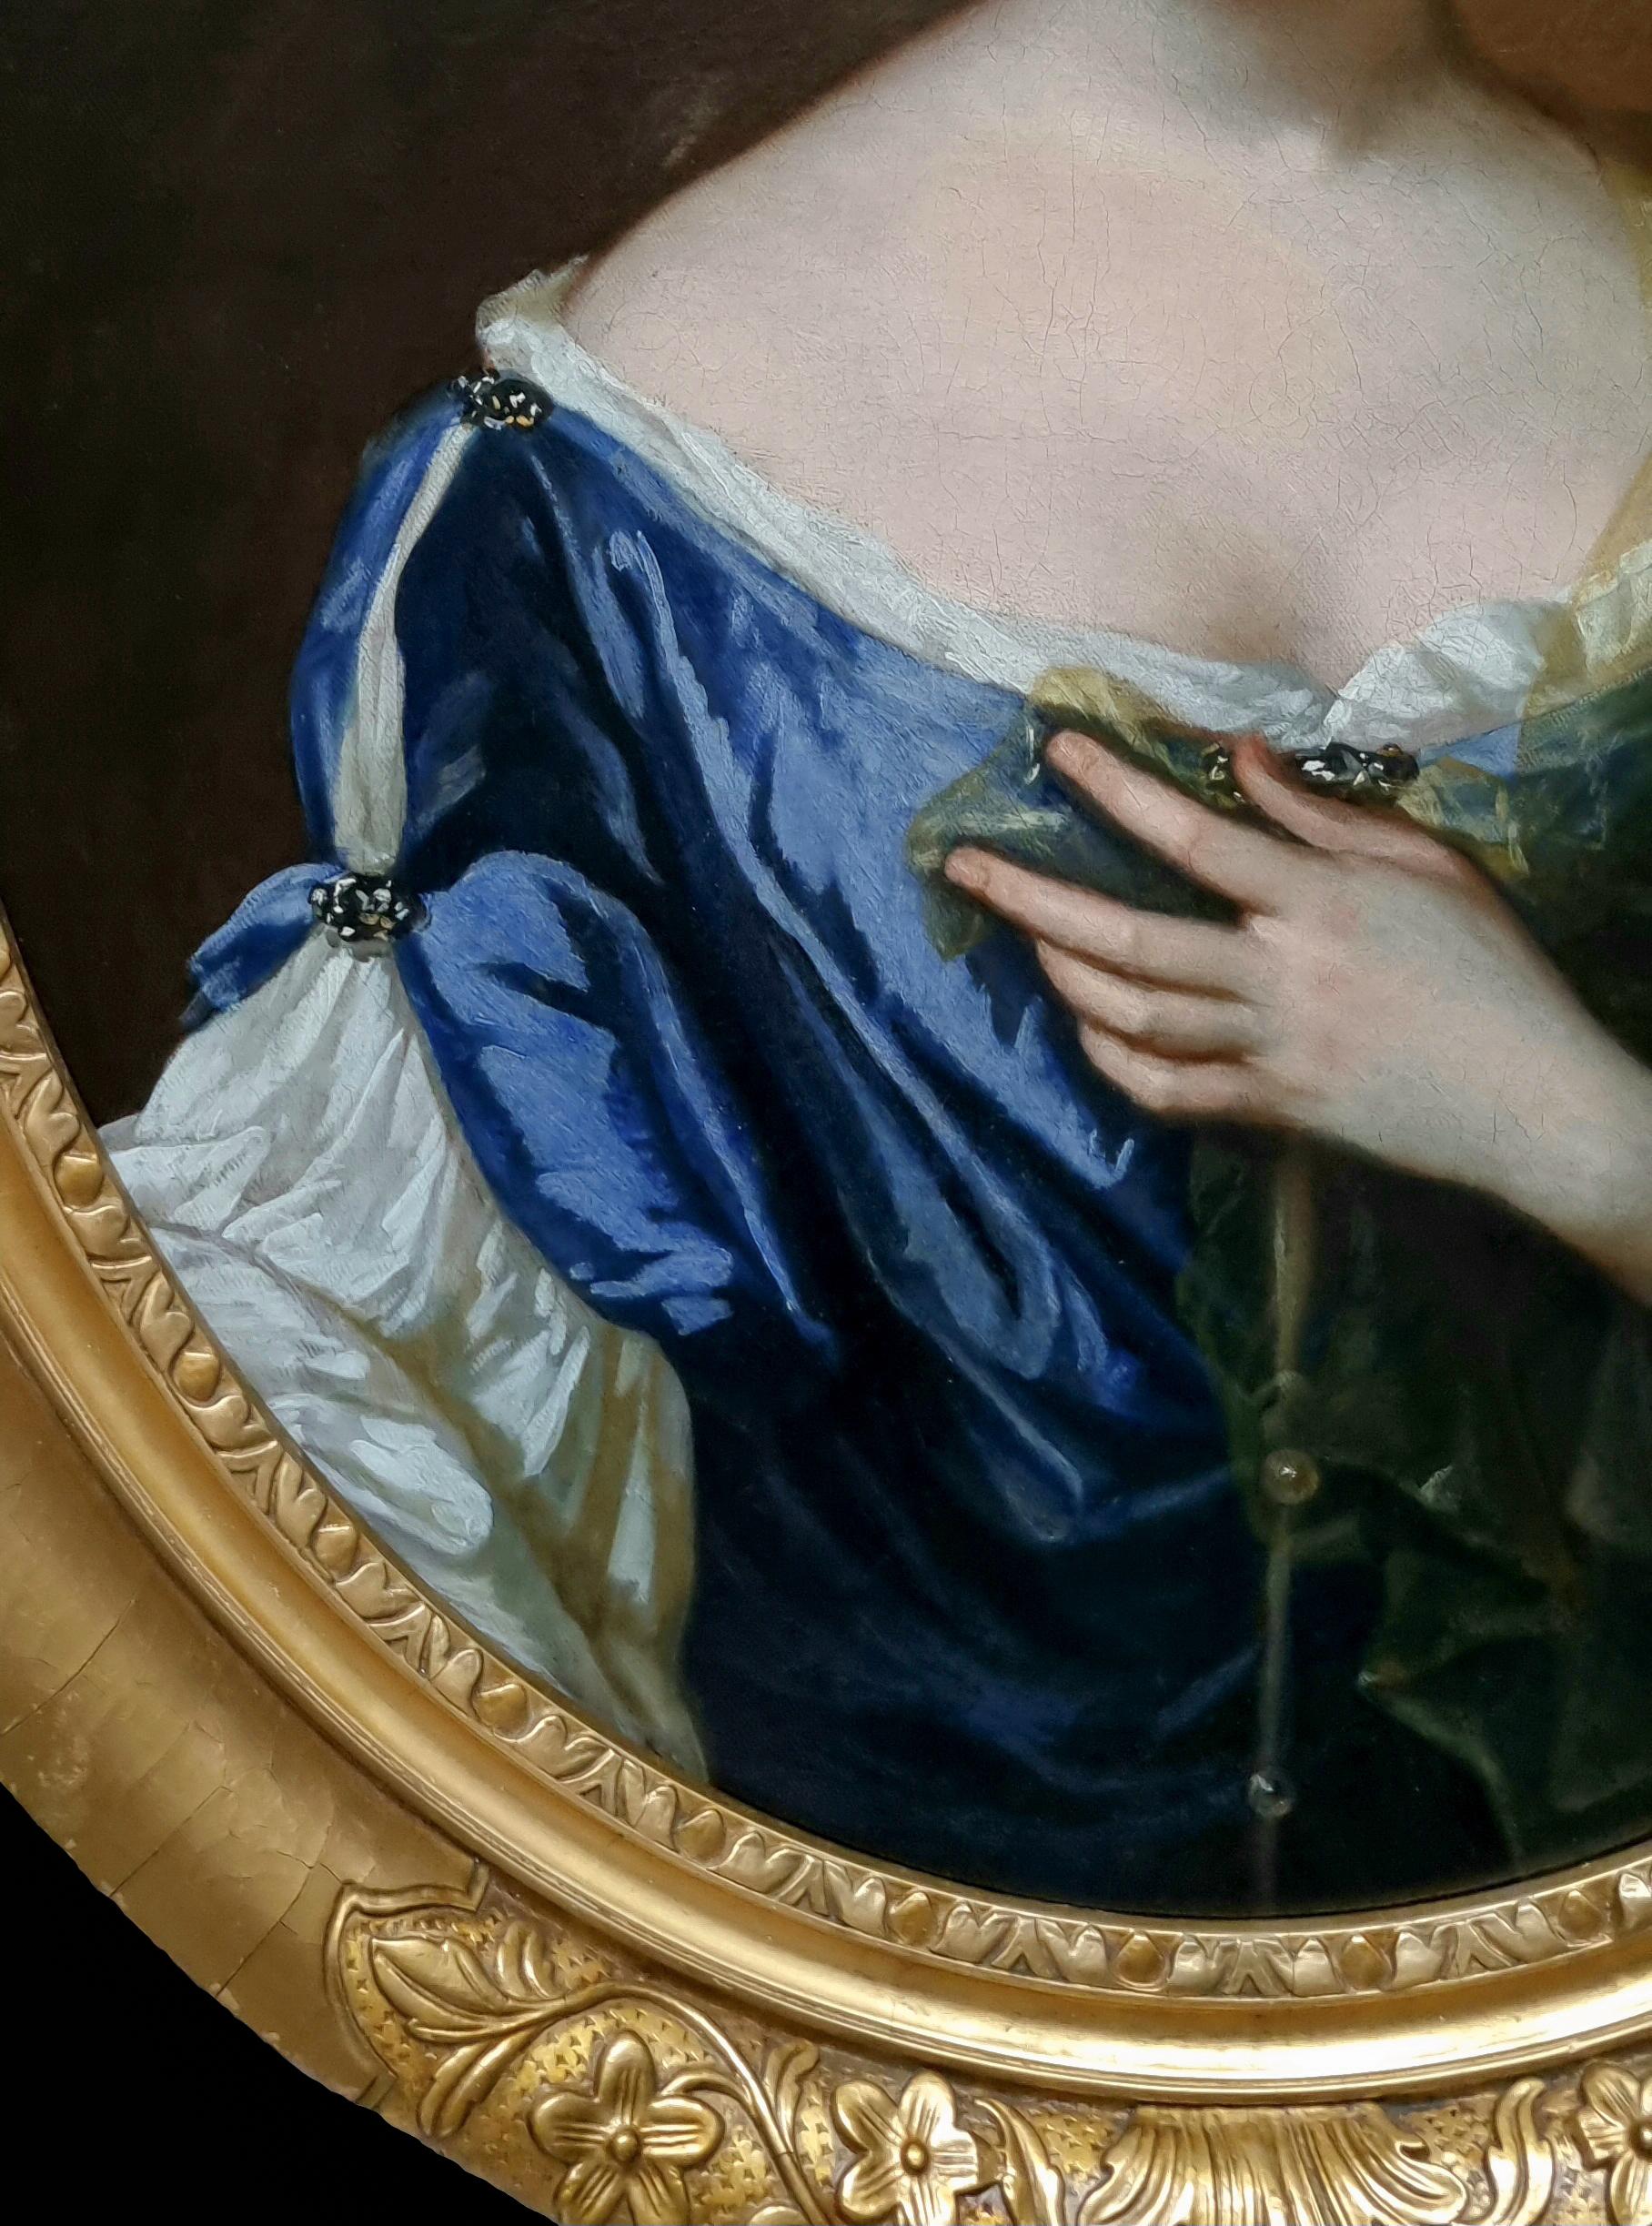 Portrait of a Lady in a Blue Gown Holding a Sheer Scarf c.1675-85, Oil on canvas For Sale 2